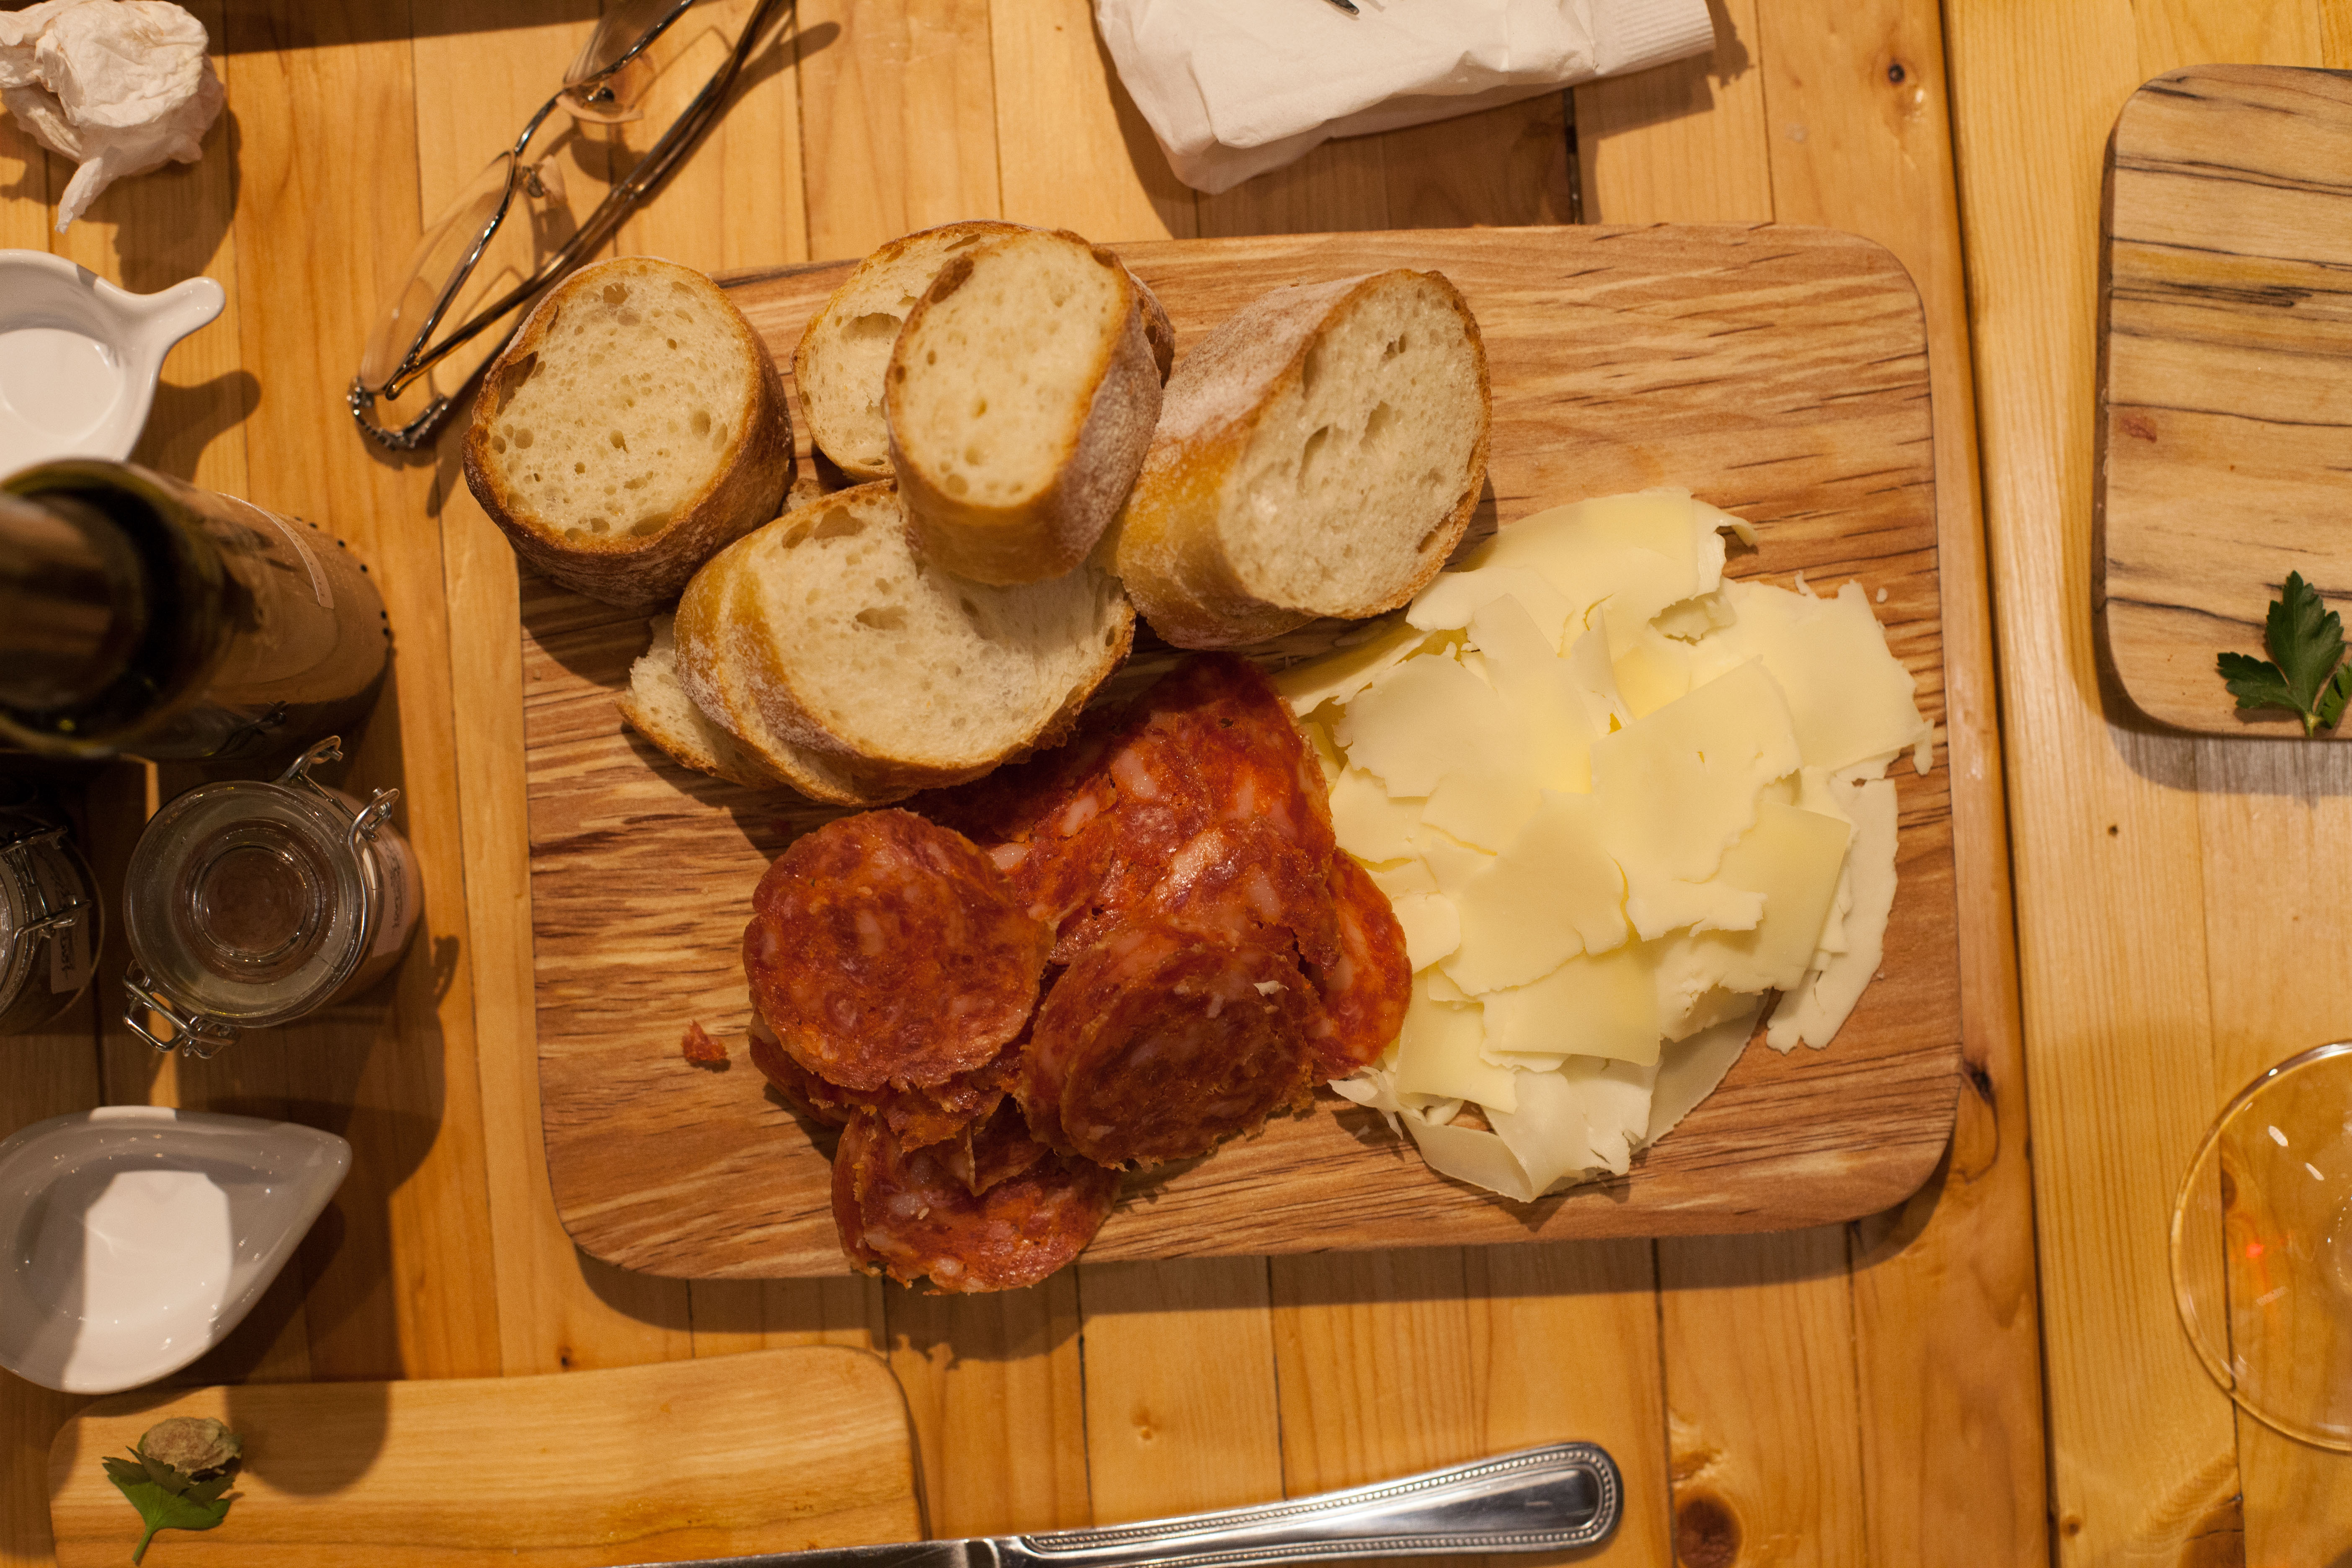 A meat and cheese 'Drizzle Board' from Overflow Taps neighbor, which can be enjoyed with a drink and friends at Overflow.